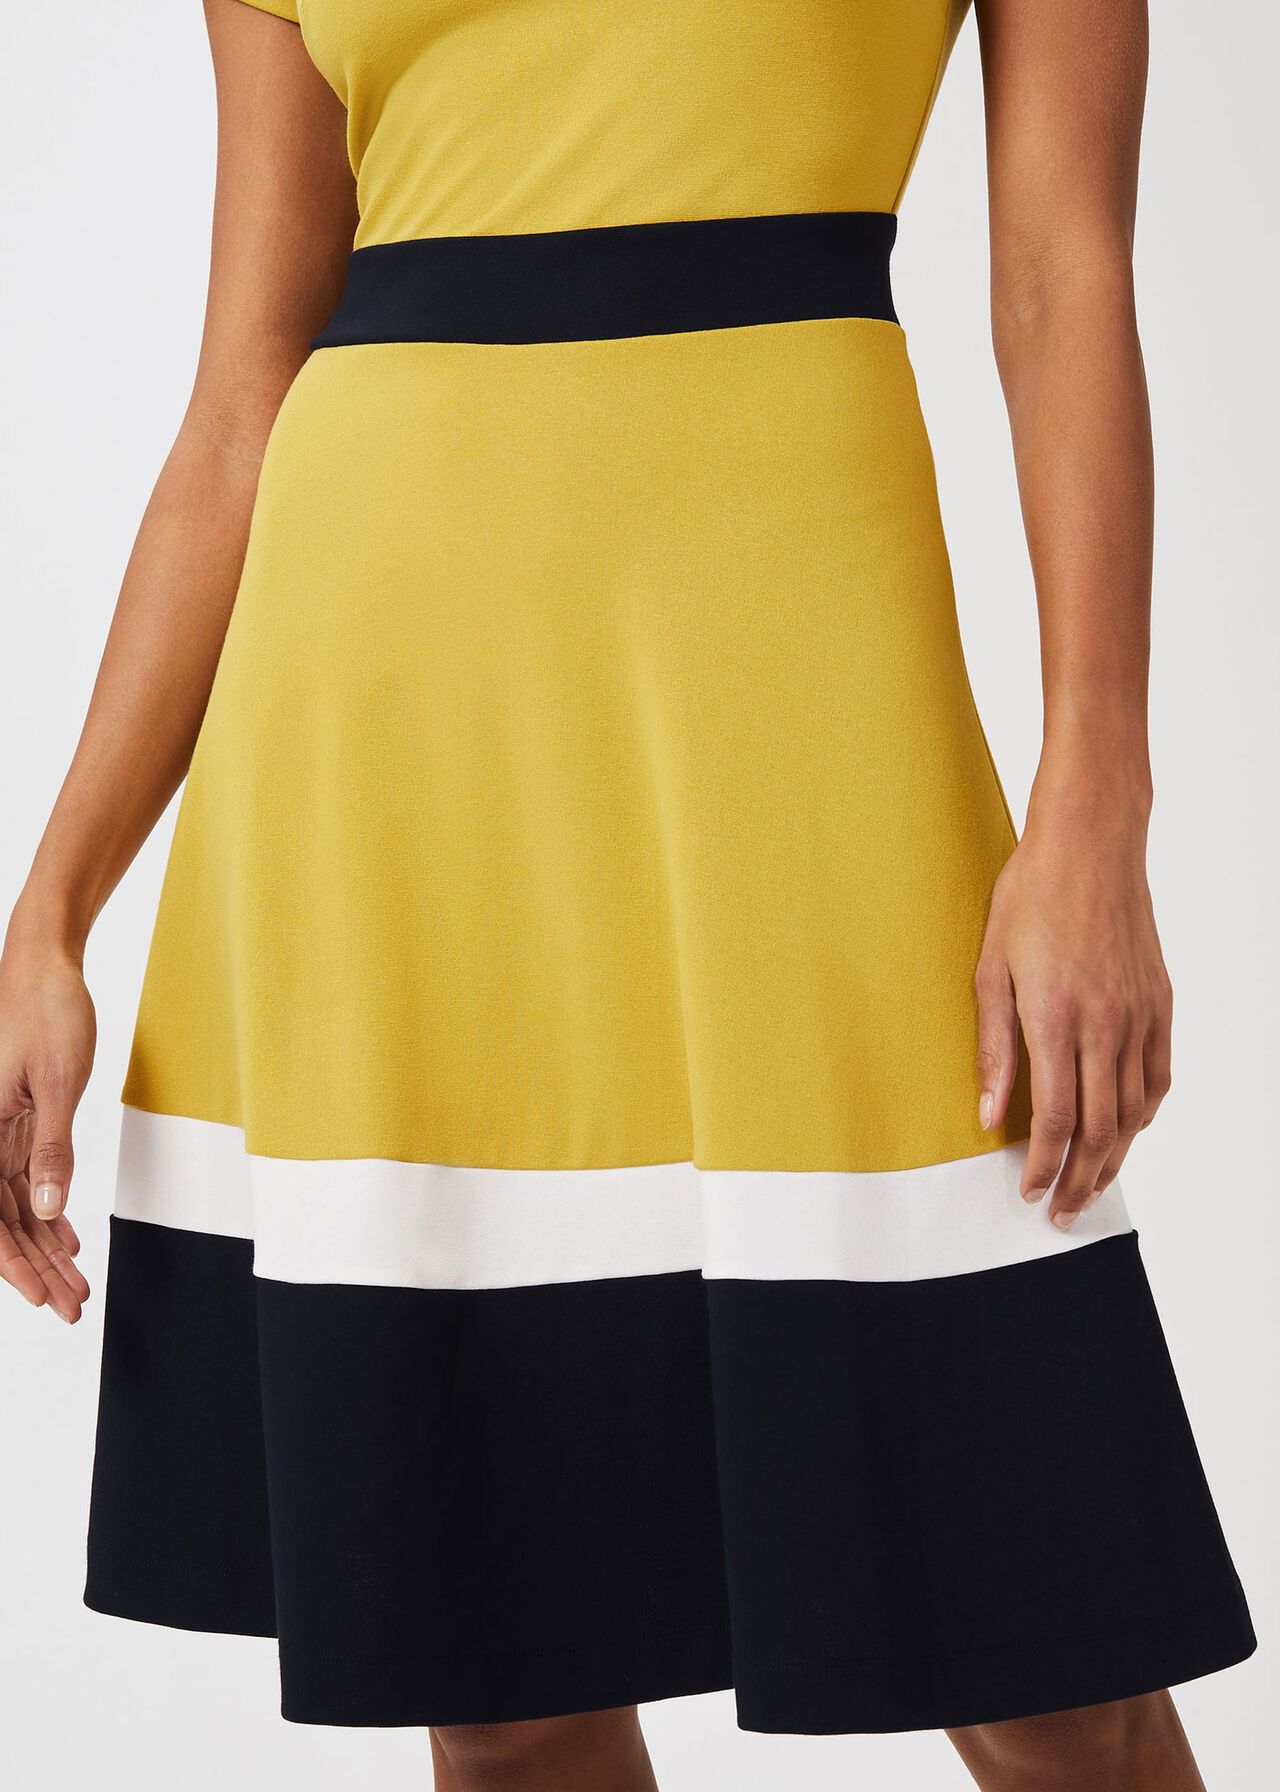 Seasalter Jersey Fit And Flare Dress, Yellow Nvy Whte, hi-res